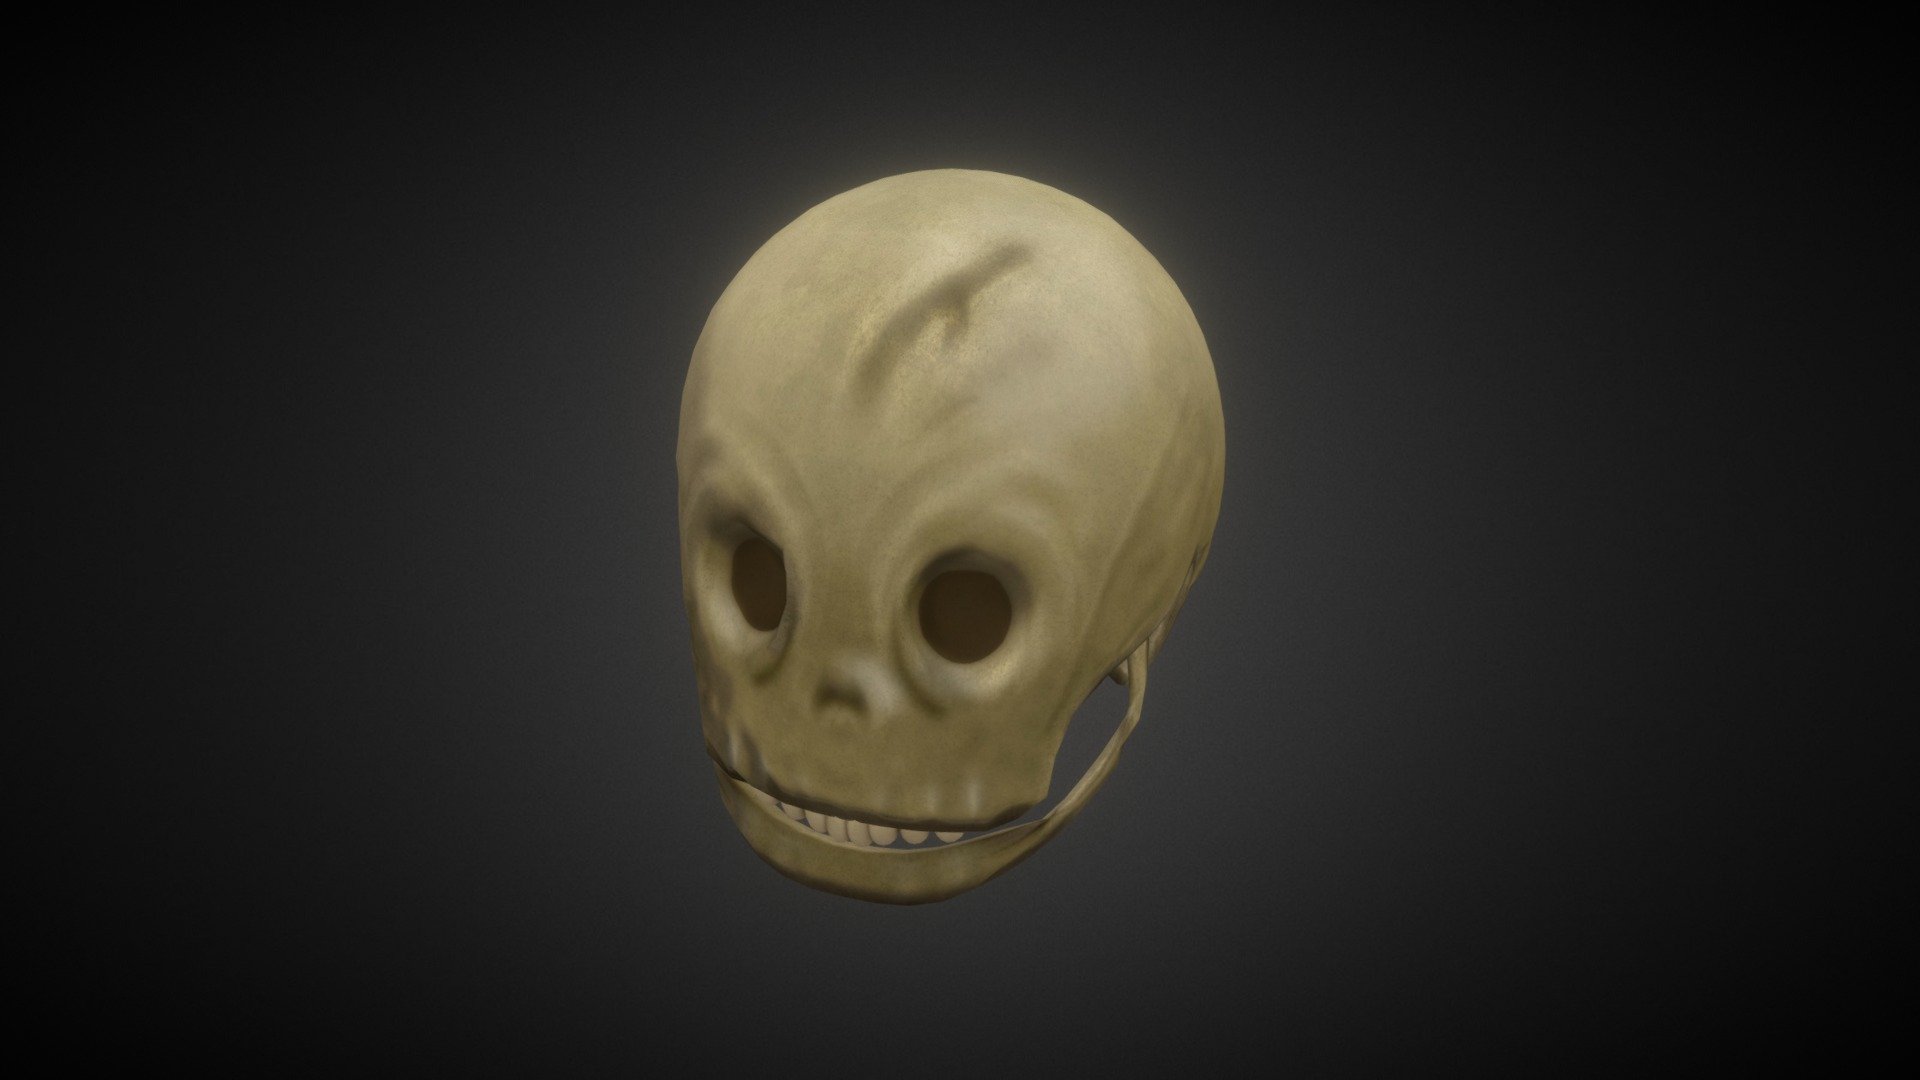 A relatively lowpoly Stylized skull made for funzies to help practice sculpting today!

I was practicing sculpting and I thinK I'm getting pretty decent at it now, still a lot more left to learn!

Lot of hand done painting on this skull

Also yes, I made this in the same 4 hours as the Cthulhu Skull for those who were wondering - Stylized Cartoon Skull - Download Free 3D model by Vindition 3d model